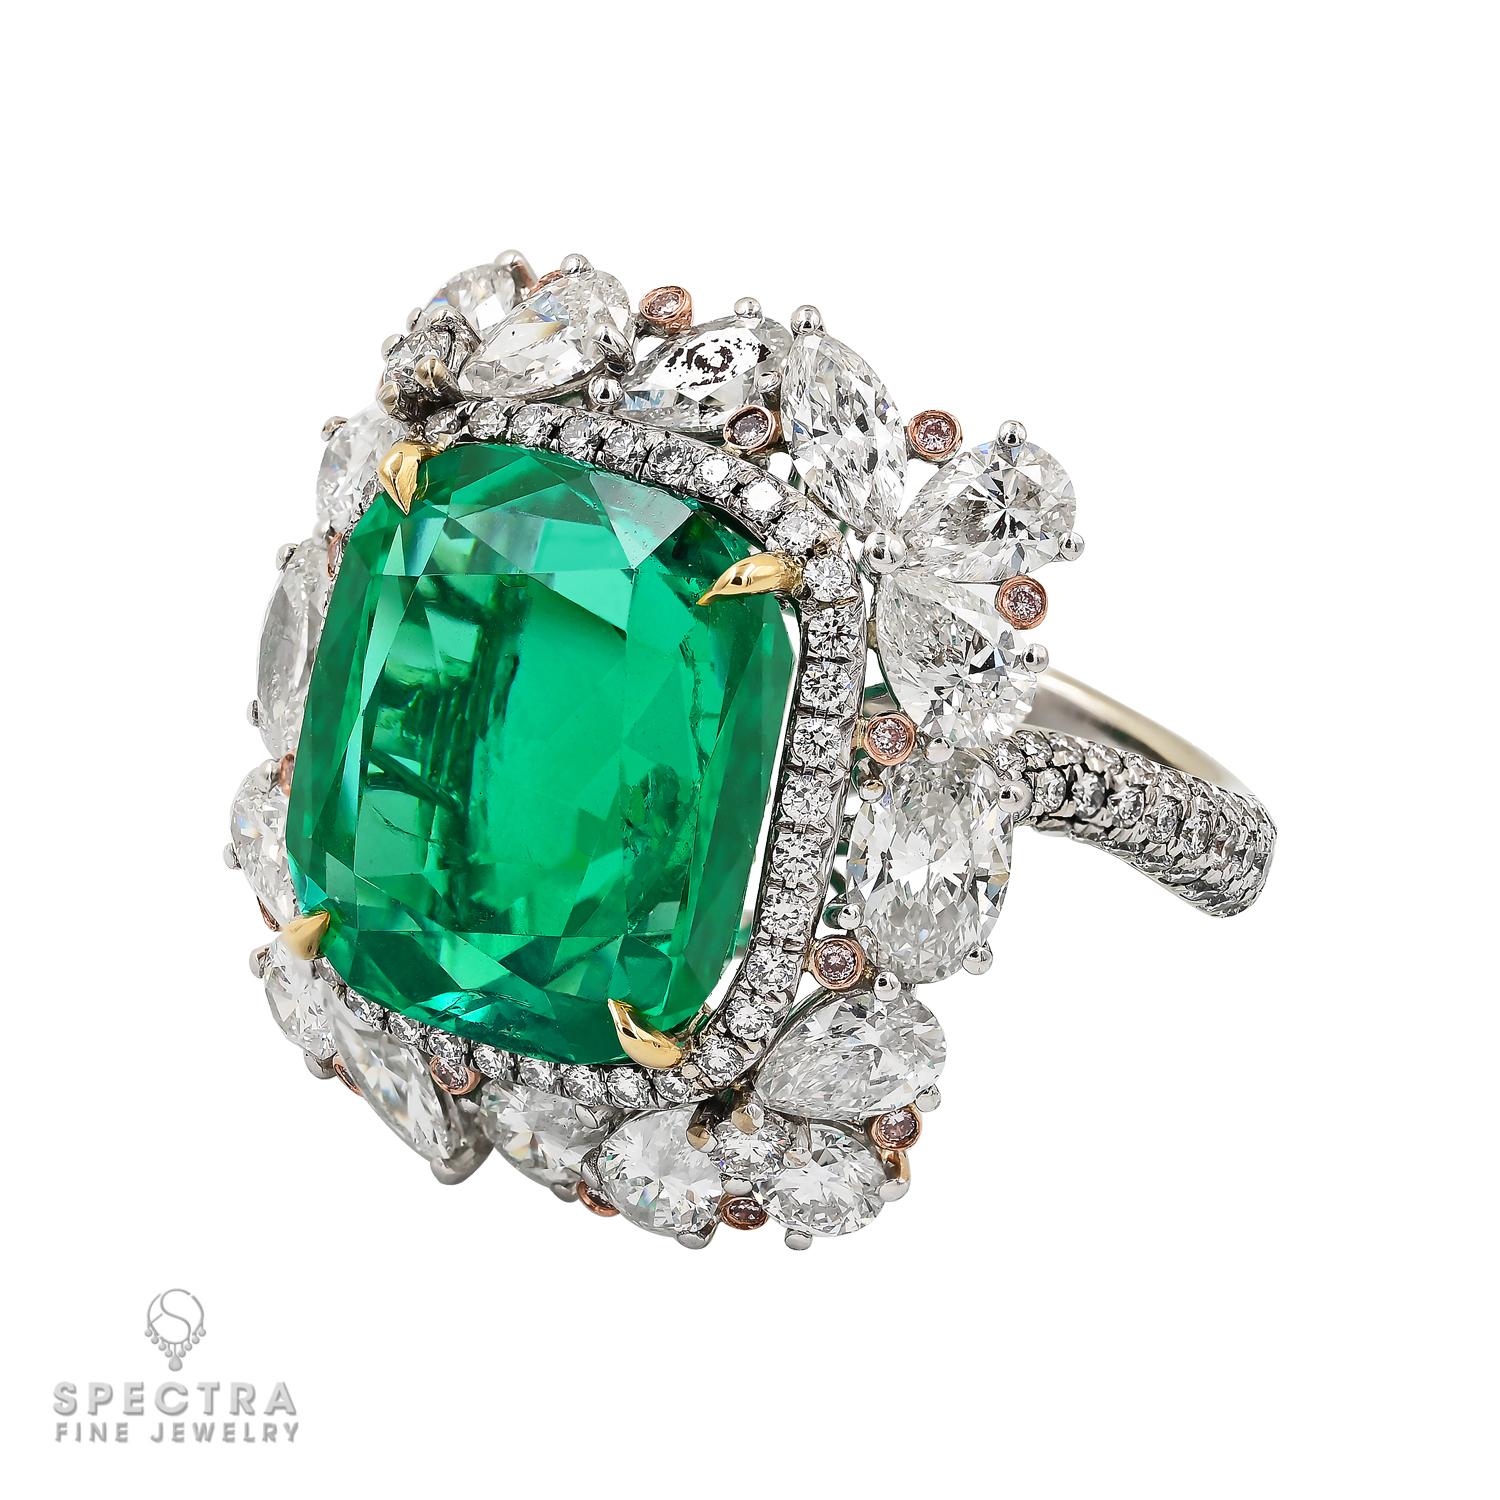 Introducing an extraordinary statement piece: the 11.30-carat Colombian Emerald Diamond Cocktail Ring. At its center shines a magnificent 11.30-carat emerald-cut Colombian Emerald, adorned with a diamond halo, certified by AGL.
This captivating